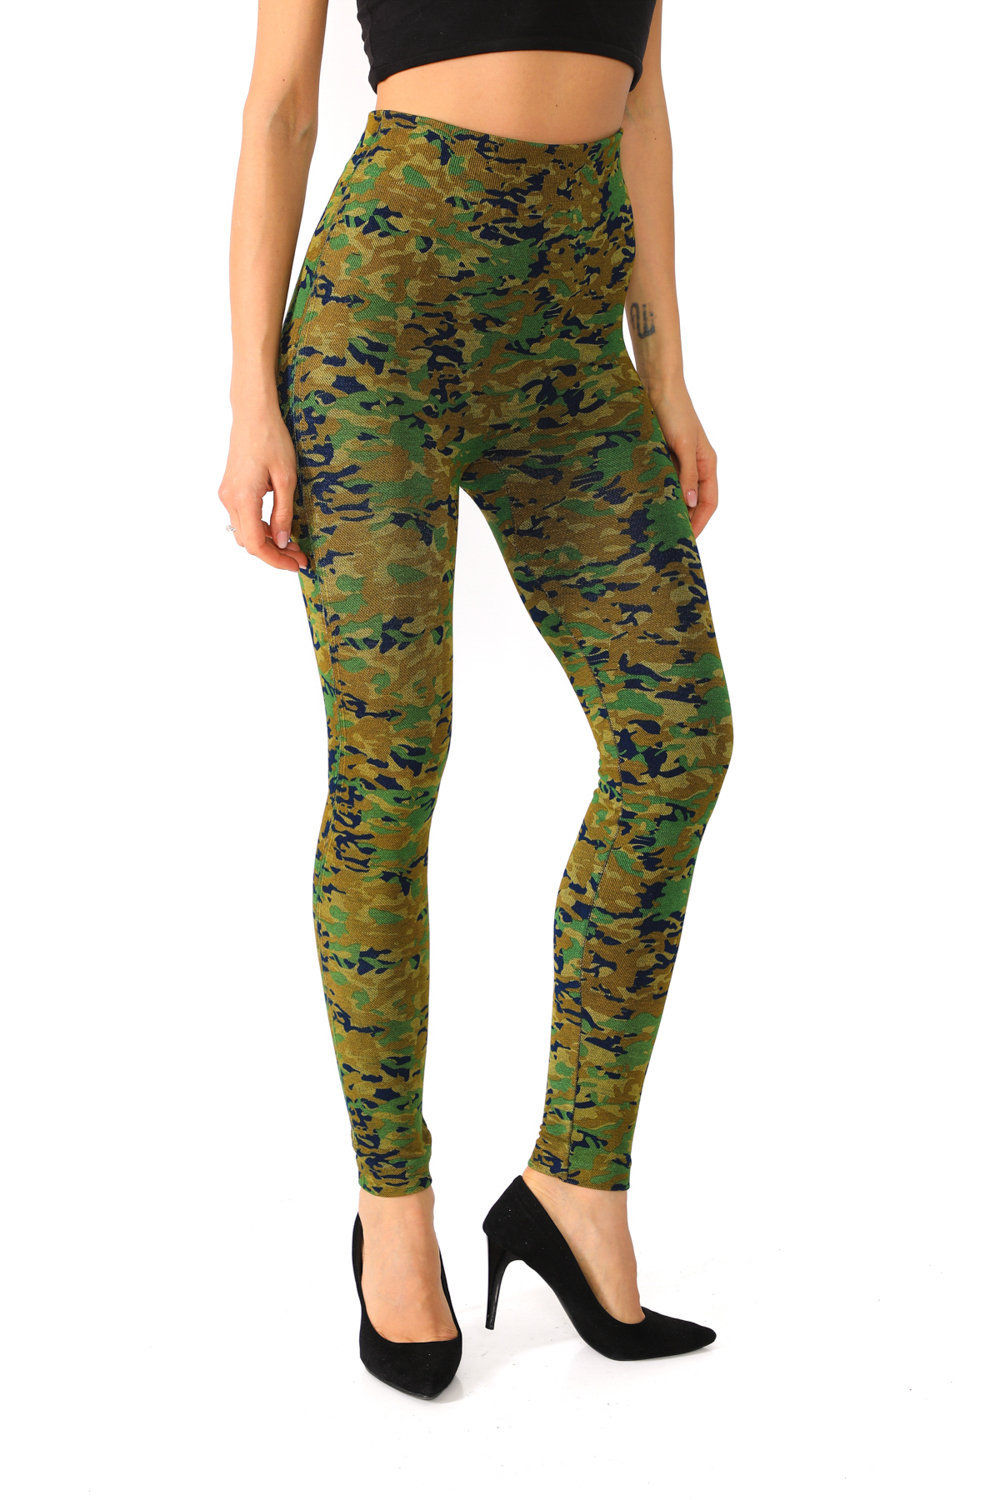 Denim Leggings with Olive Color Camo Pattern - 3